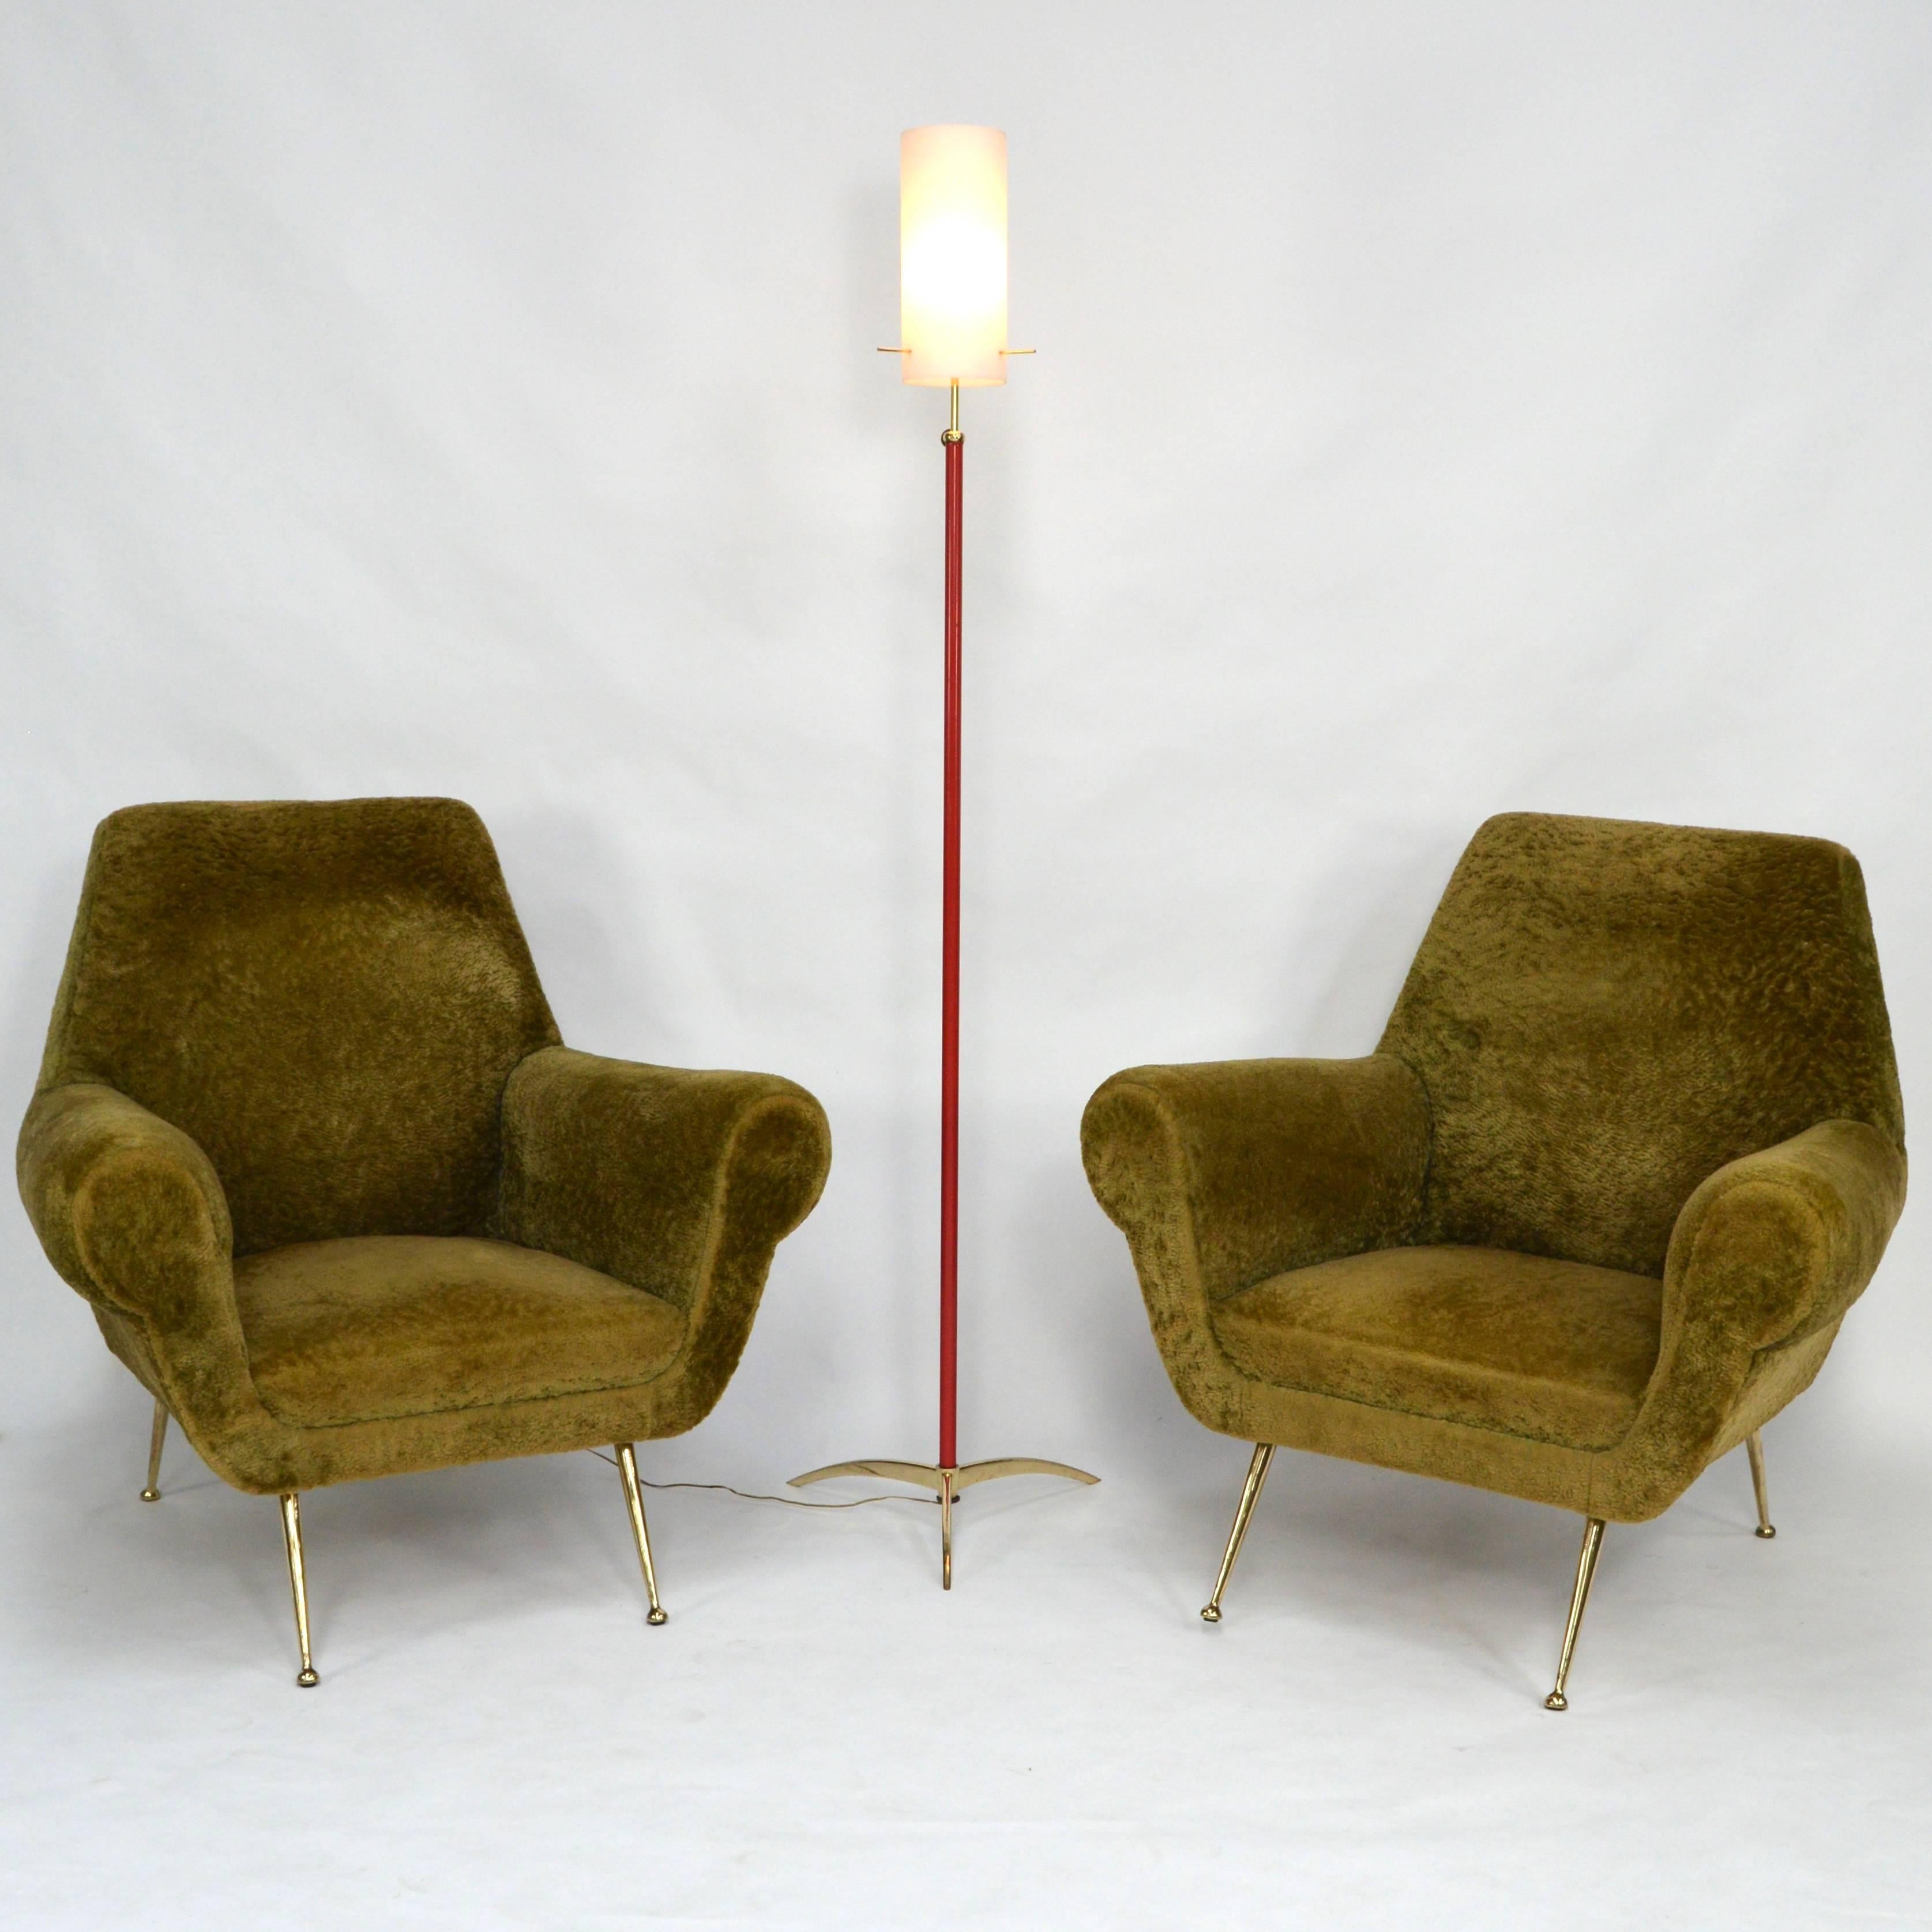 Stunning Italian floor lamp with opaline glass lamp shade and brass details. 
Maybe manufactured by Arredoluce.
The lamp shade is adjustable in height. 
Very elegant and exclusive model in excellent condition. 
The brass has been polished to